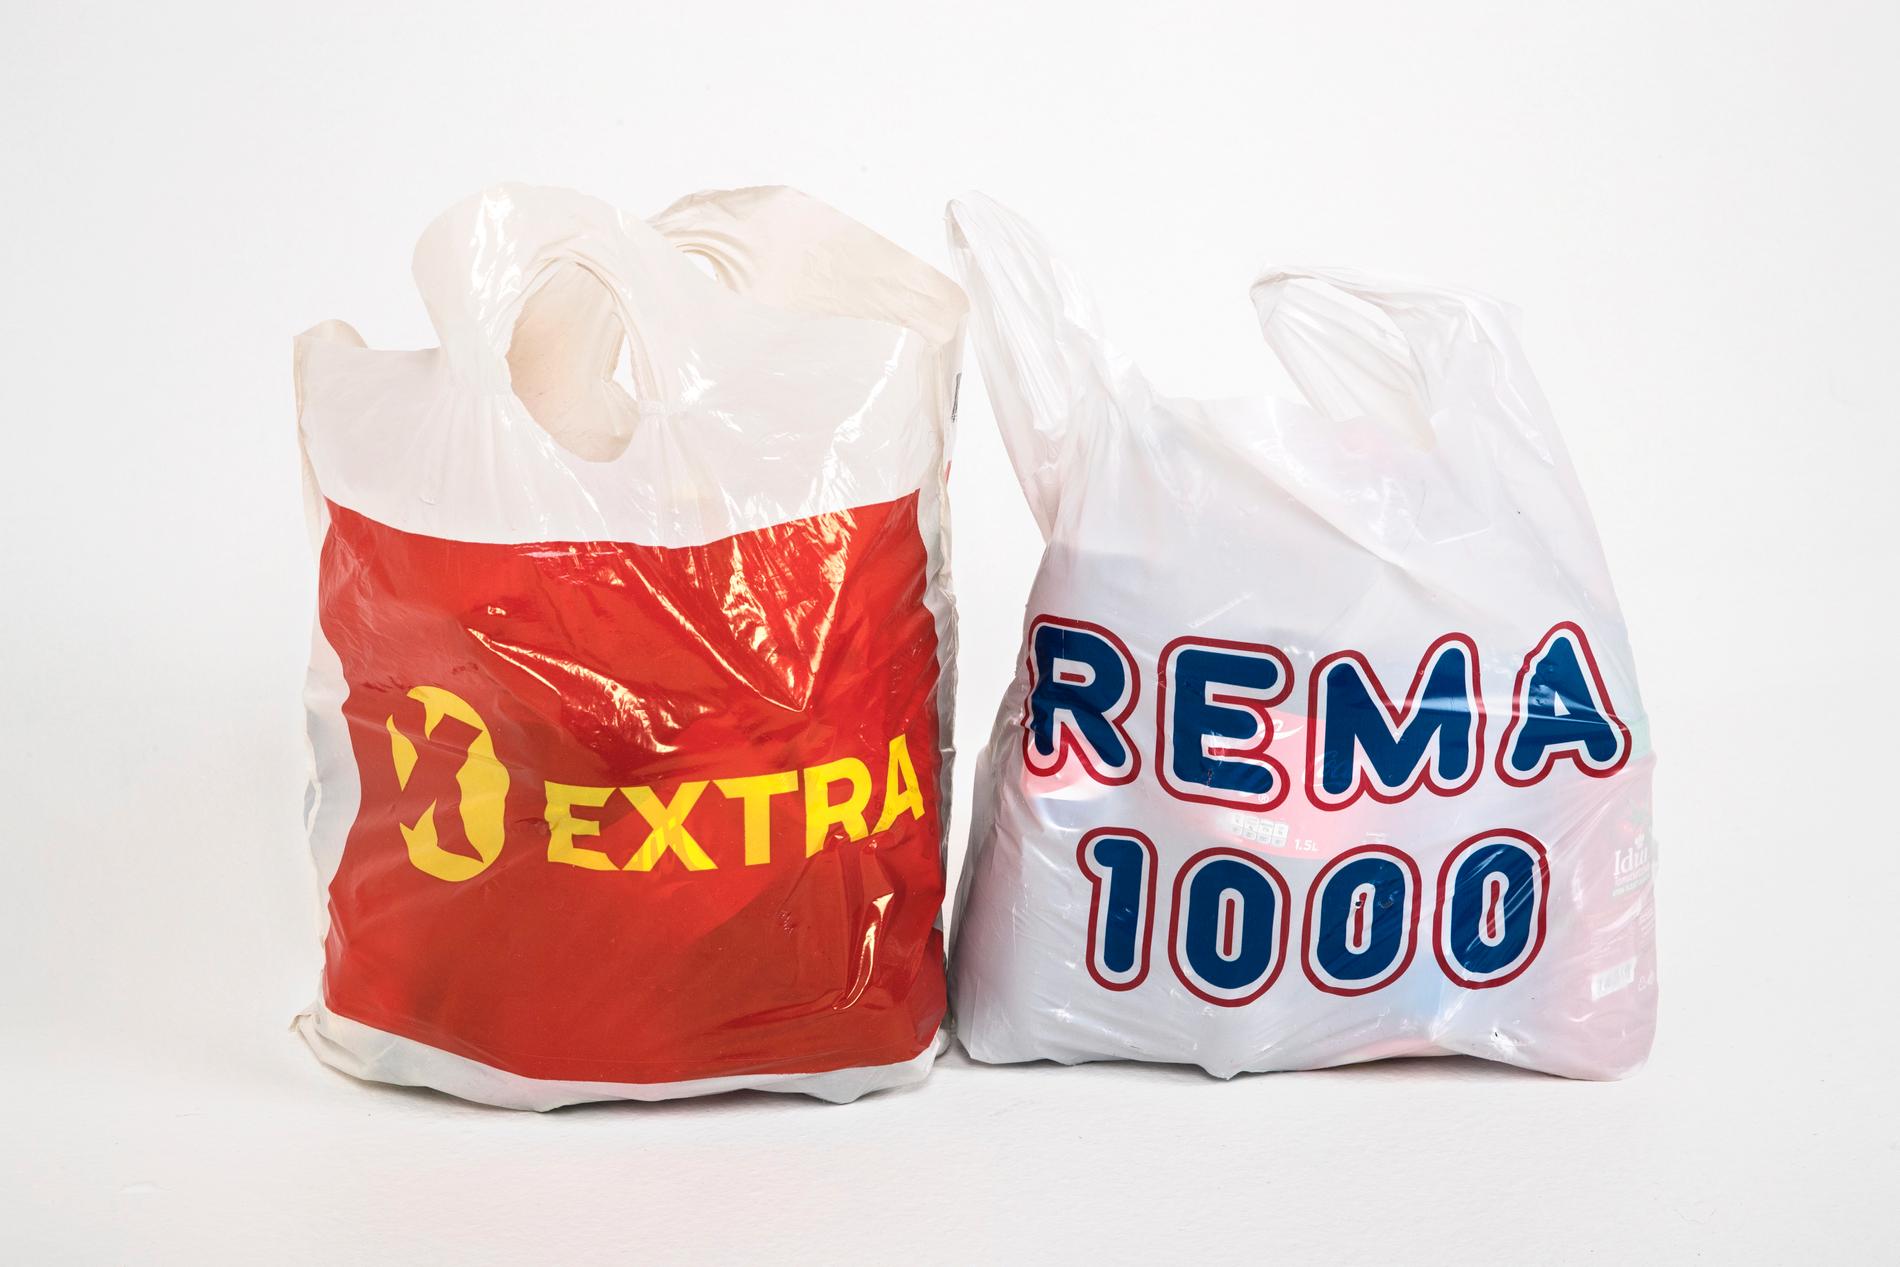 Reema 1000 and Coupe Extra drop prices